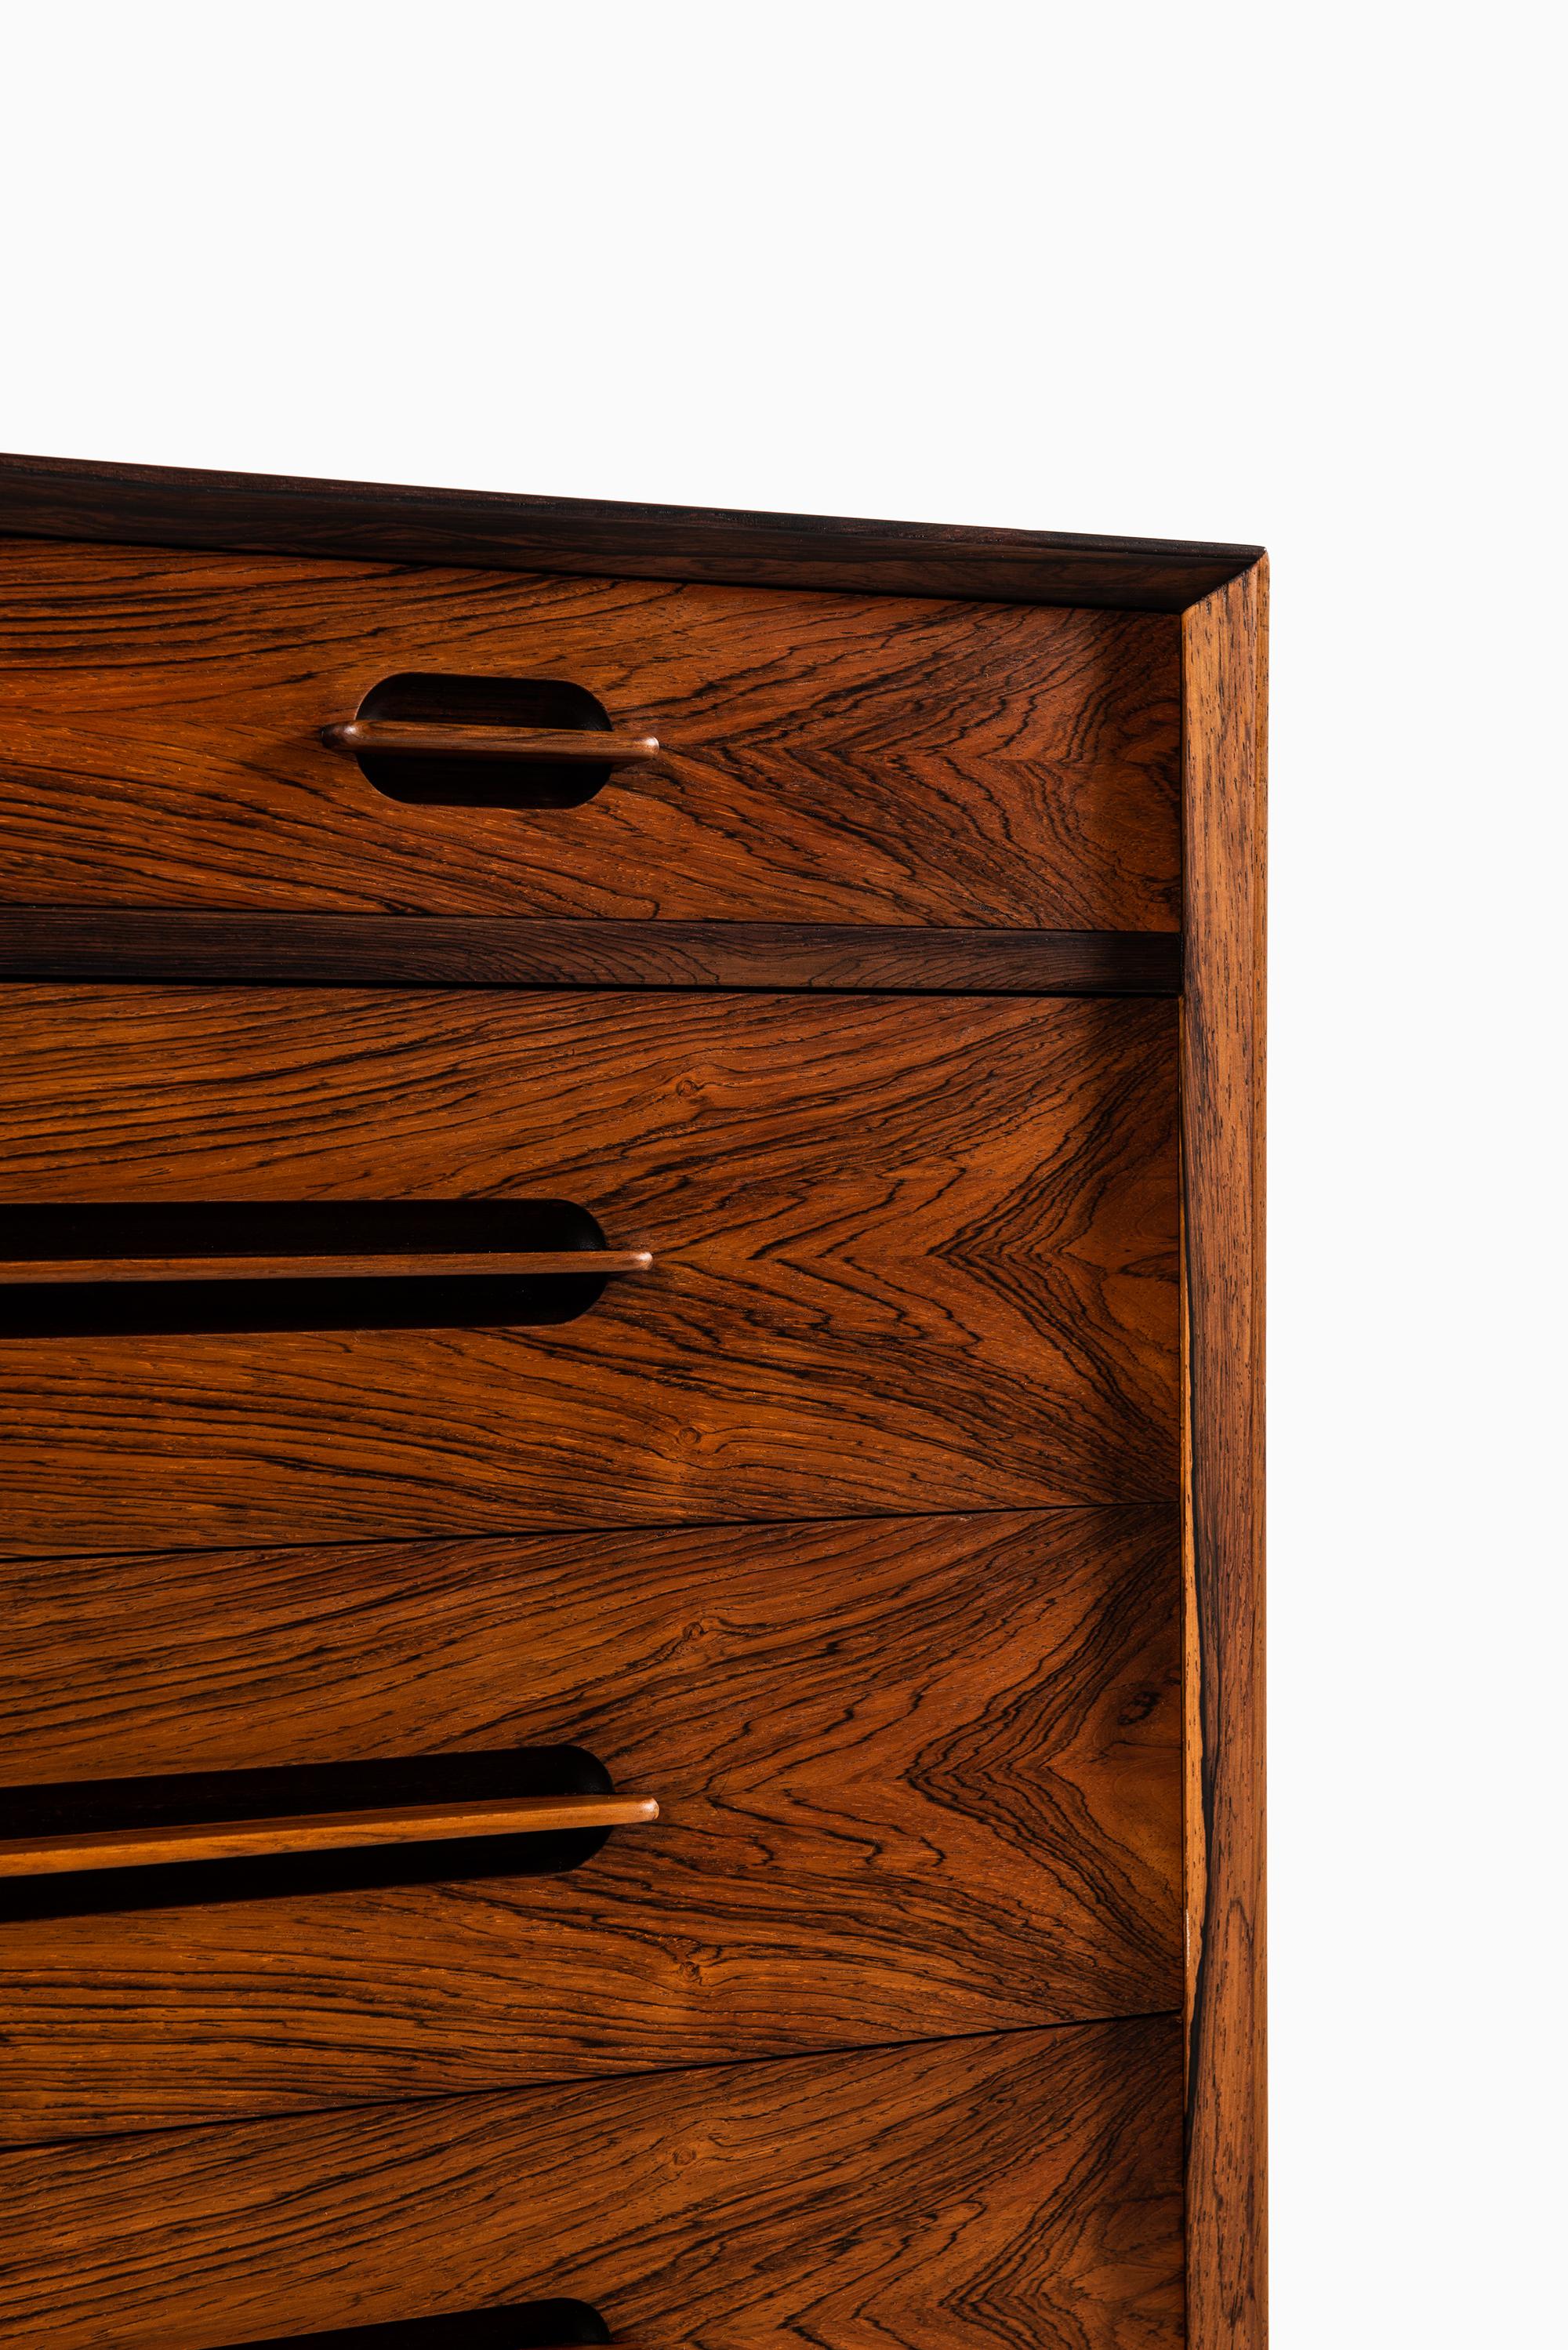 Very rare chest of drawers / bureau model 91 designed by Ejvind A. Johansson. Produced by Gern Møbelfabrik in Denmark.